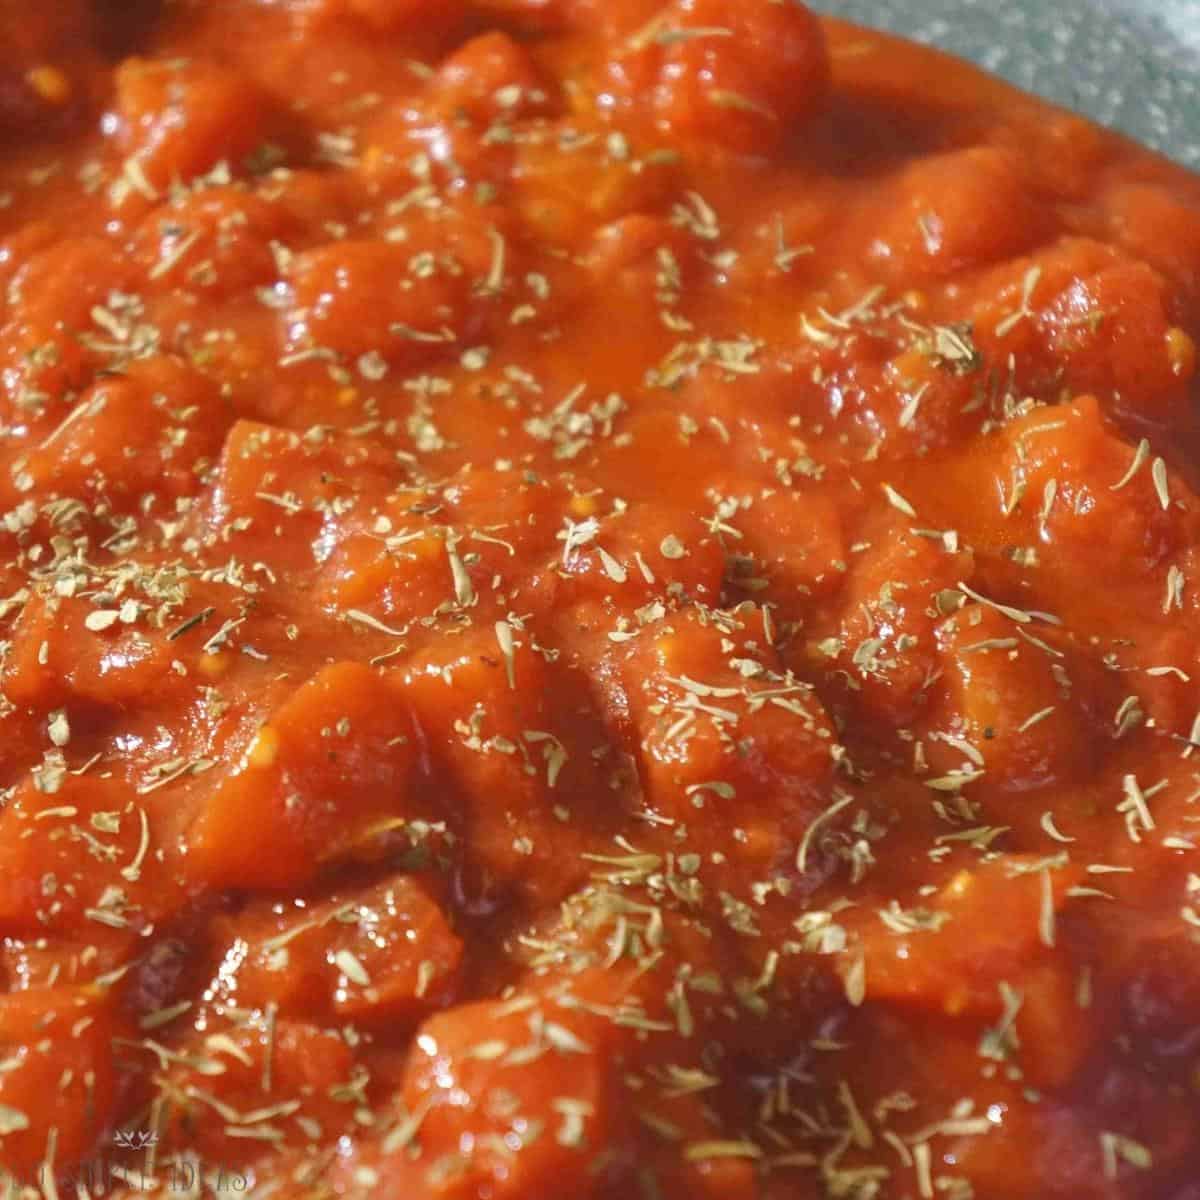 diced tomato with seasoning in pan.